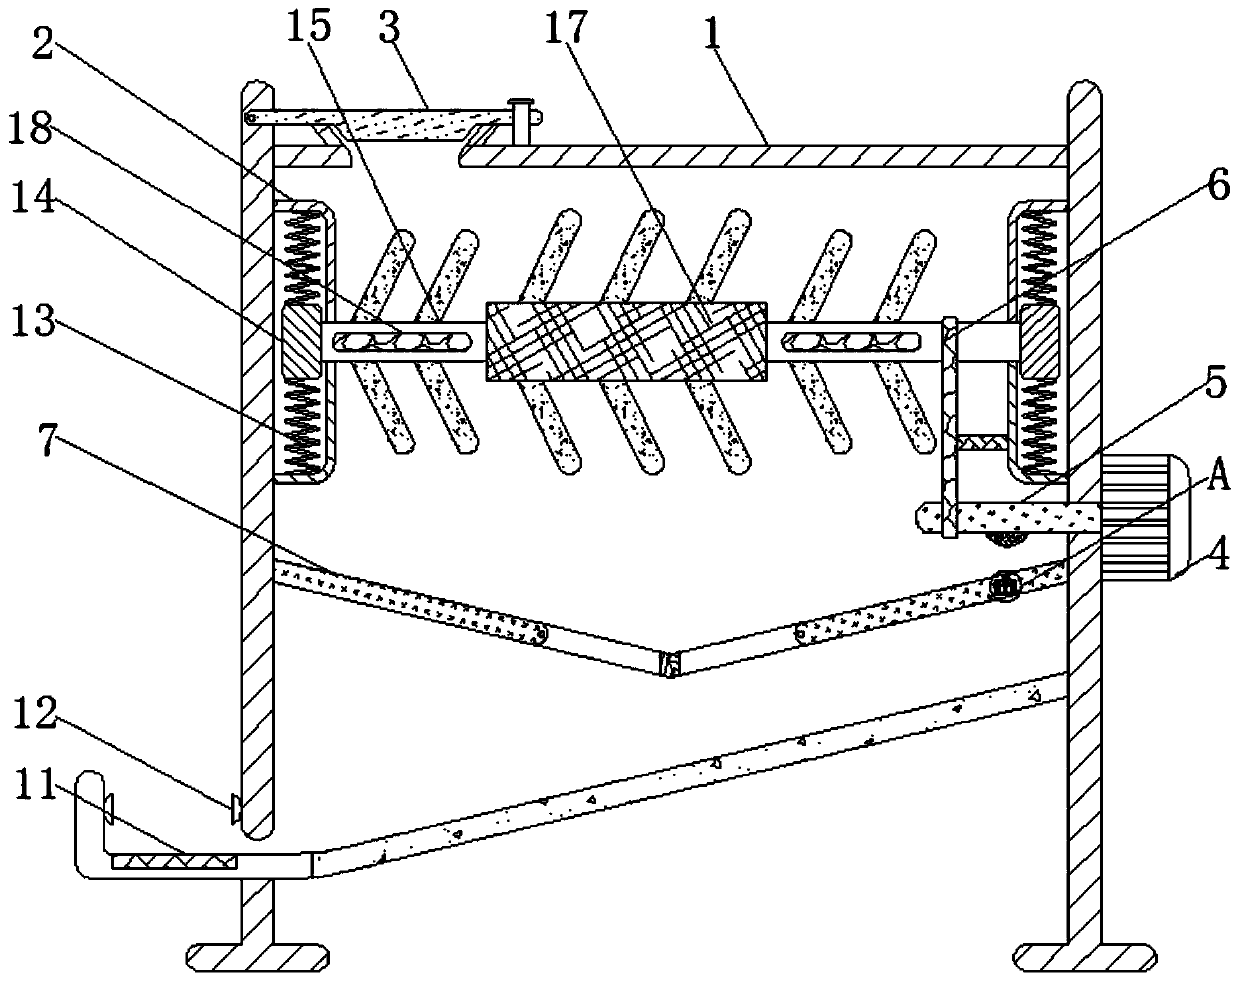 Engineering plastic cleaning and drying device based on electromagnetic induction principle